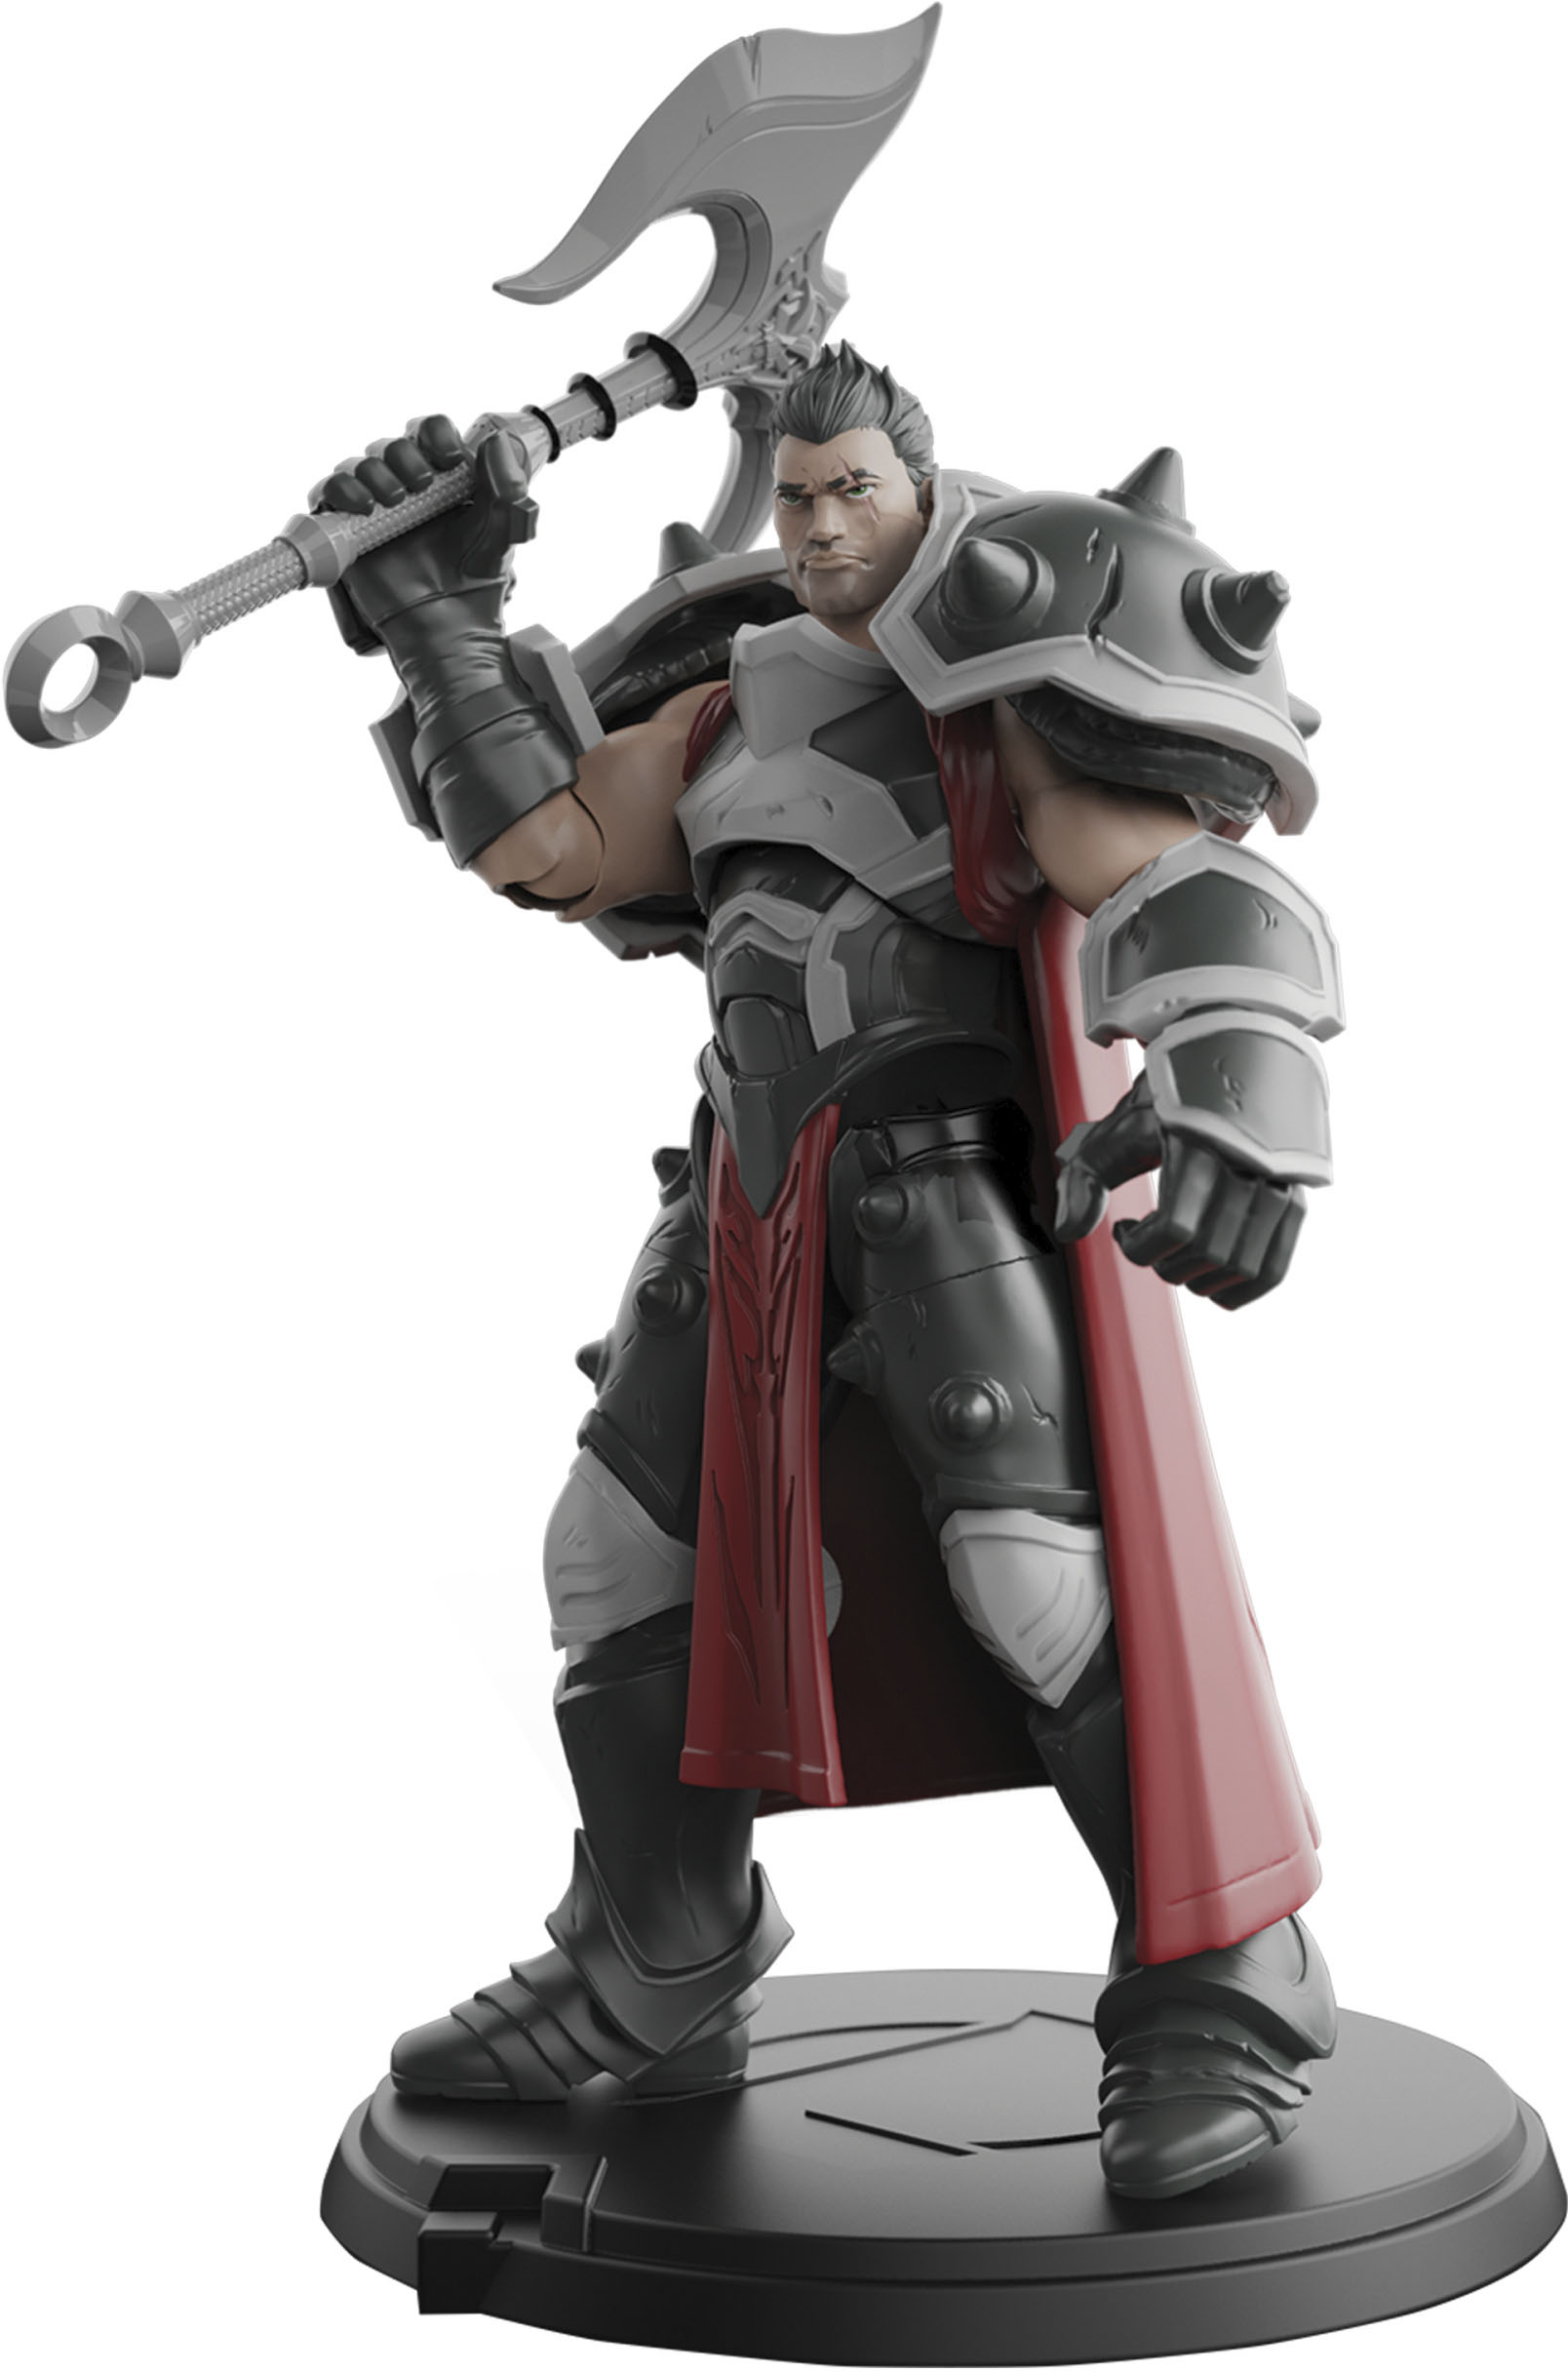 League of Legends - League of Legends, 4-Inch Darius Collectible Figure w/ Premium Details and Axe Accessory, Ages 12 and Up